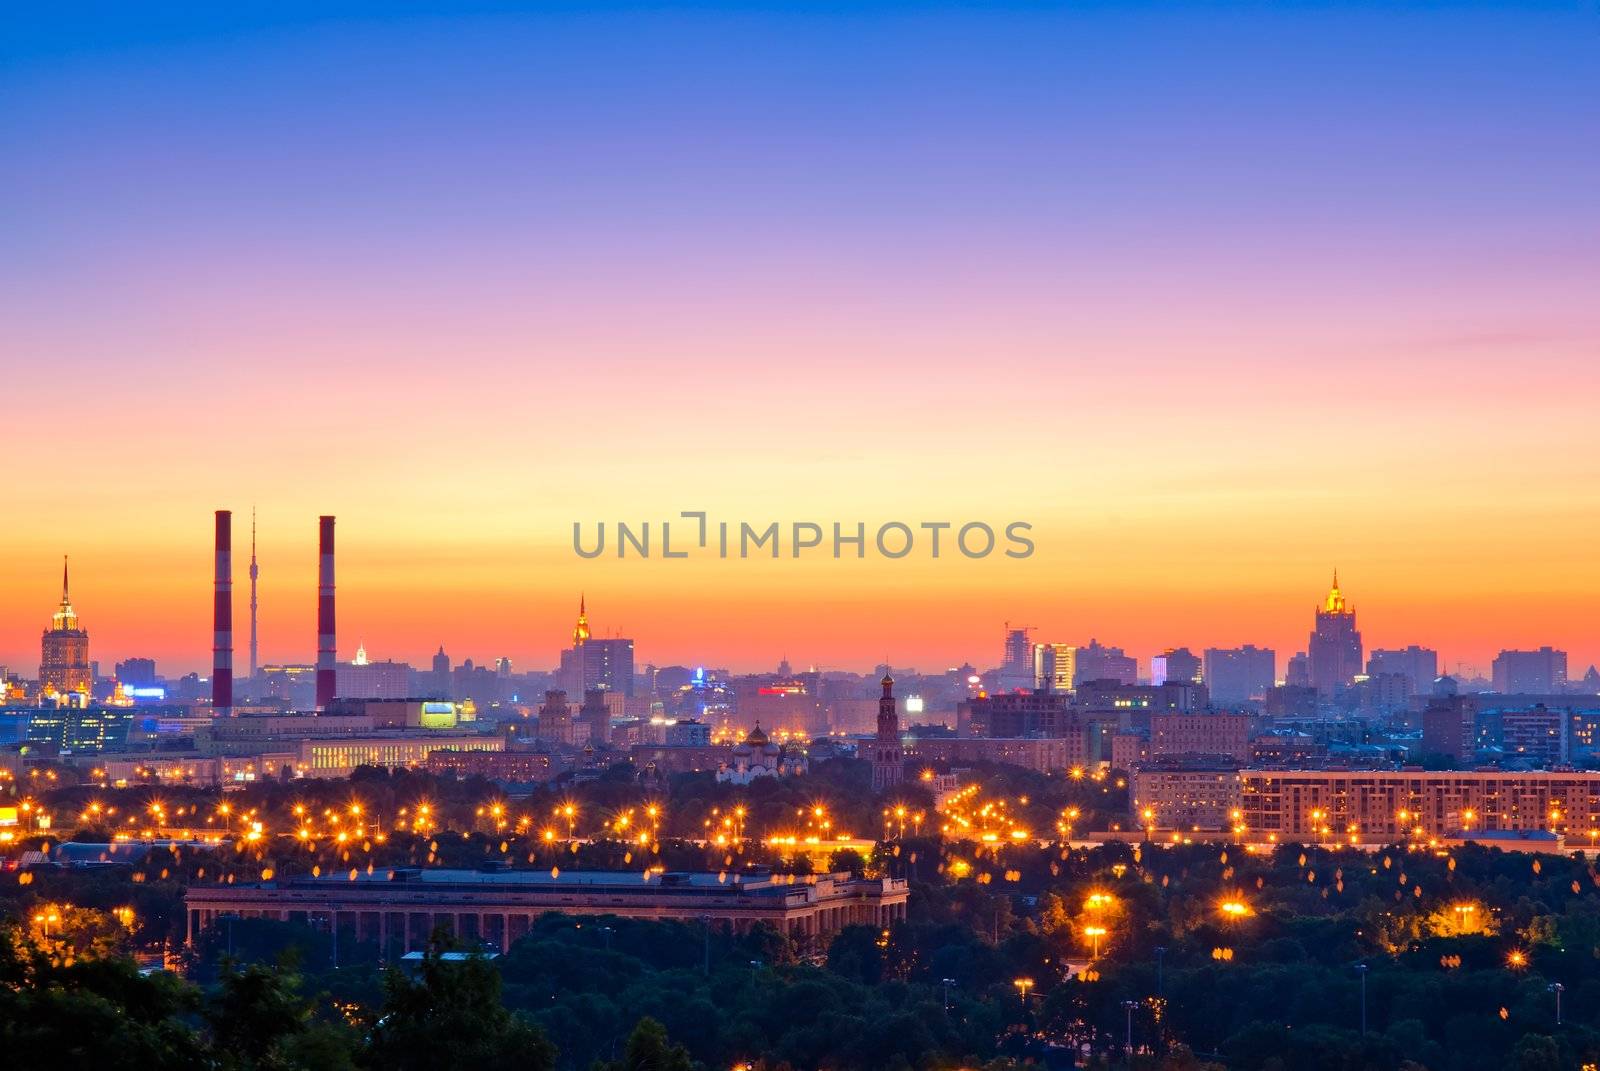 Evening Moscow, view from Sparrow Hills